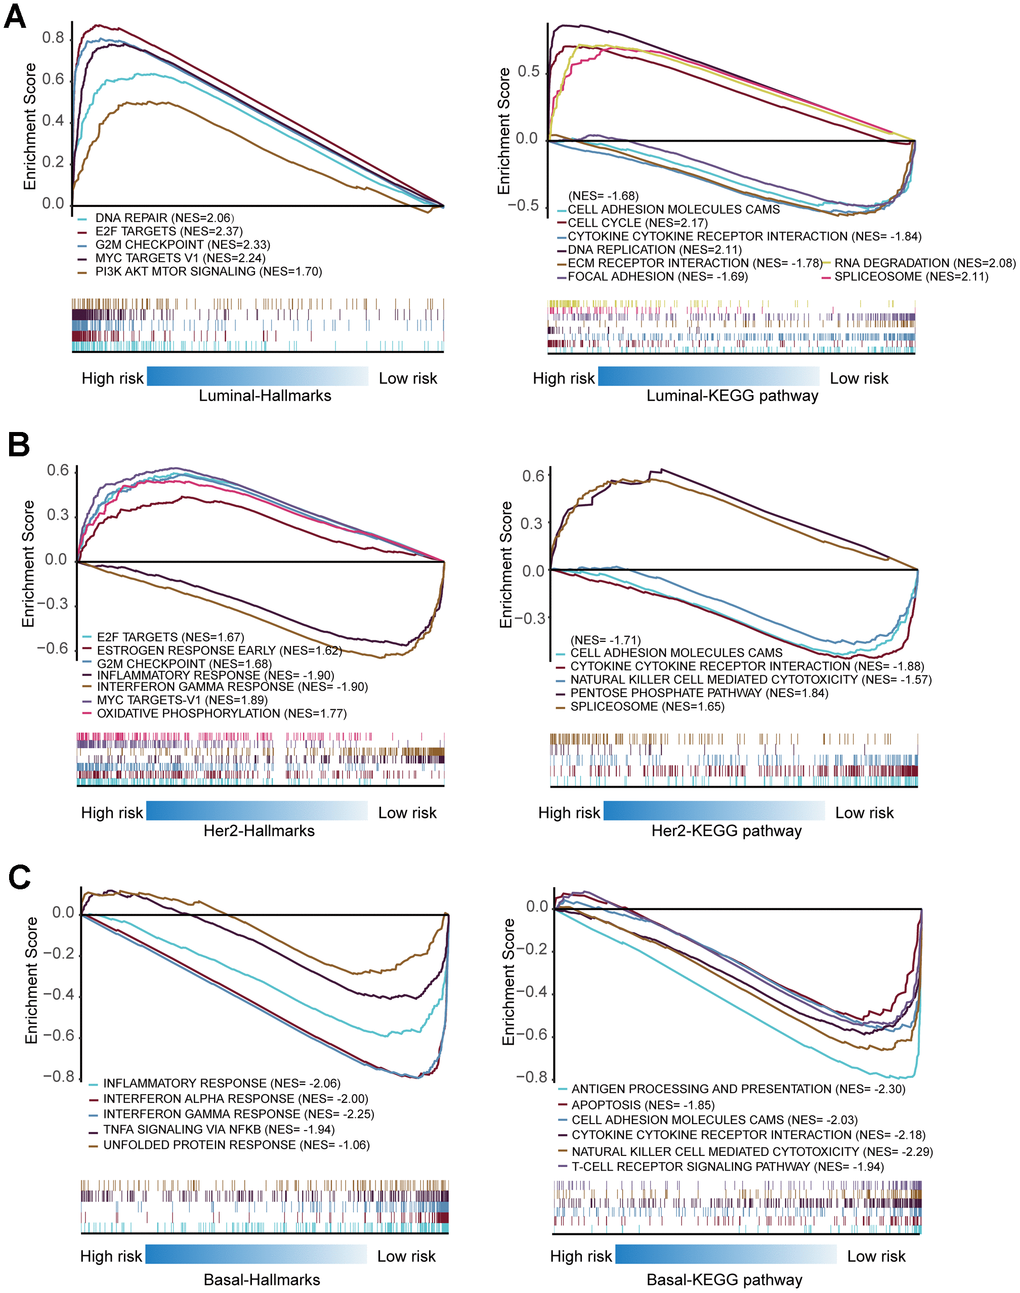 Gene set enrichment analysis of genes in high-risk and low-risk patients in Luminal, Her-2 and Basal-like BRCA. (A) Gene set enrichment analysis (GSEA) showing the enrichment of Hallmarks and KEGG pathways in high-risk and low-risk patients with Luminal BRCA. (B) GSEA showing the enrichment of Hallmarks and KEGG pathways in high-risk and low-risk patients with Her-2 BRCA. (C) GSEA showing the enrichment of Hallmarks and KEGG pathways in high-risk and low-risk patients with Basal-like BRCA.